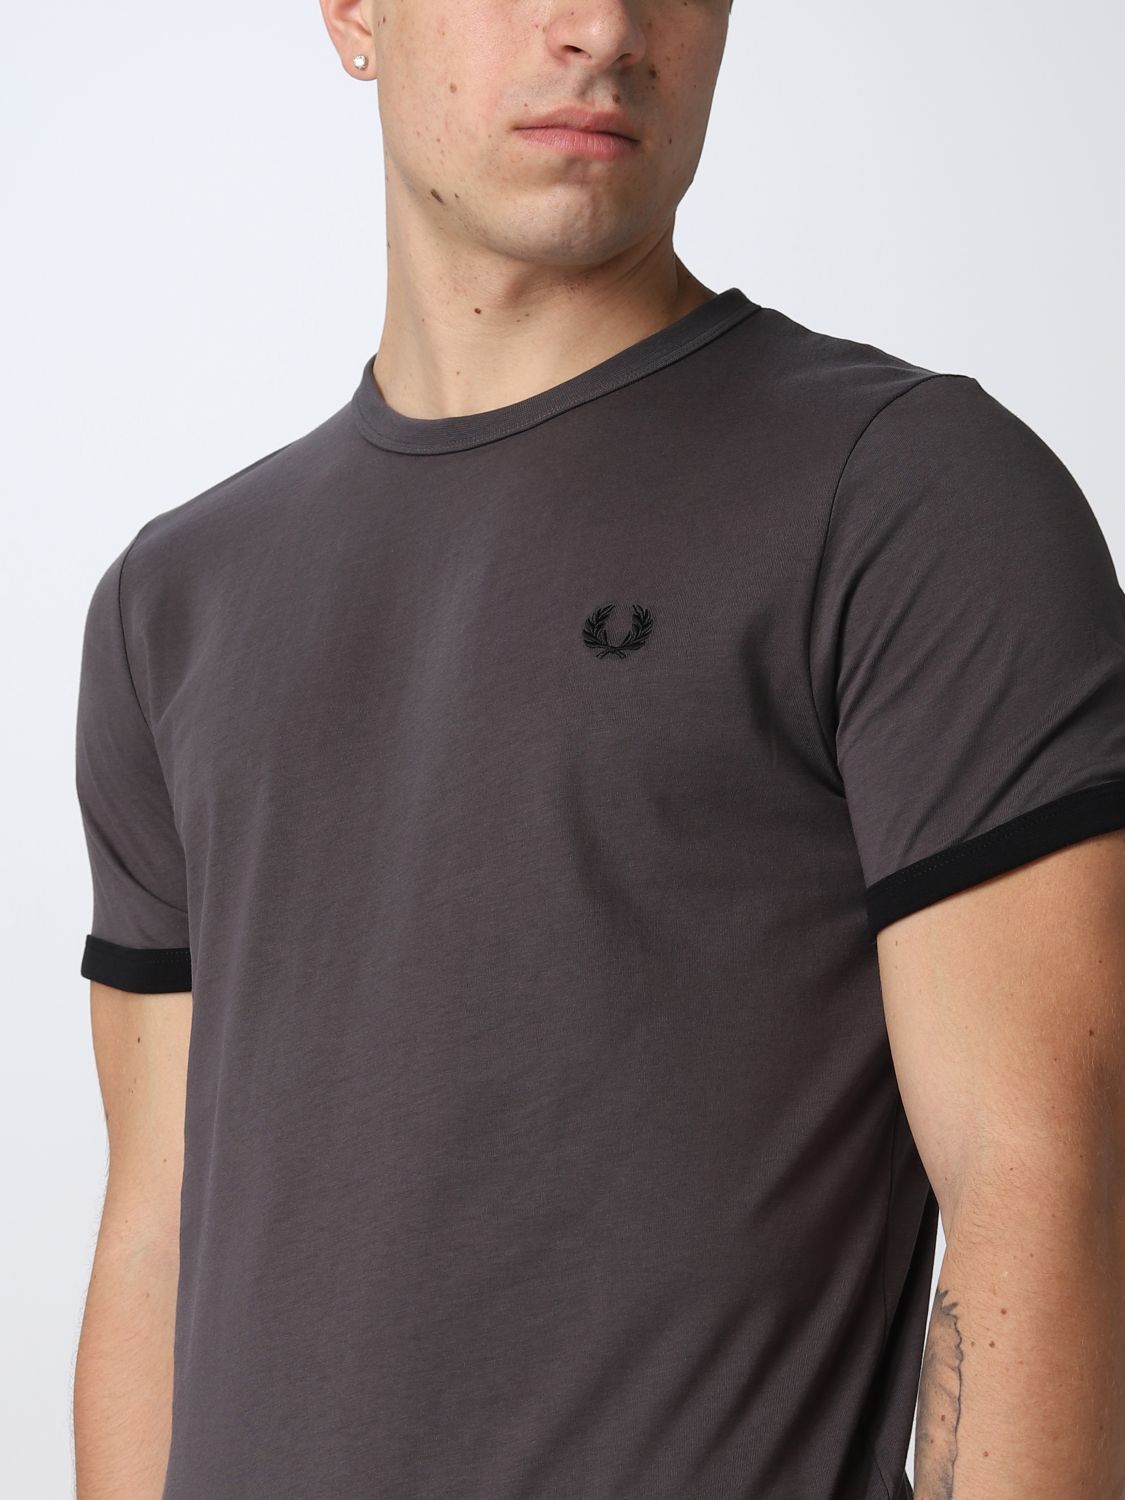 Tシャツ Fred Perry: Tシャツ Fred Perry メンズ チャコール 3